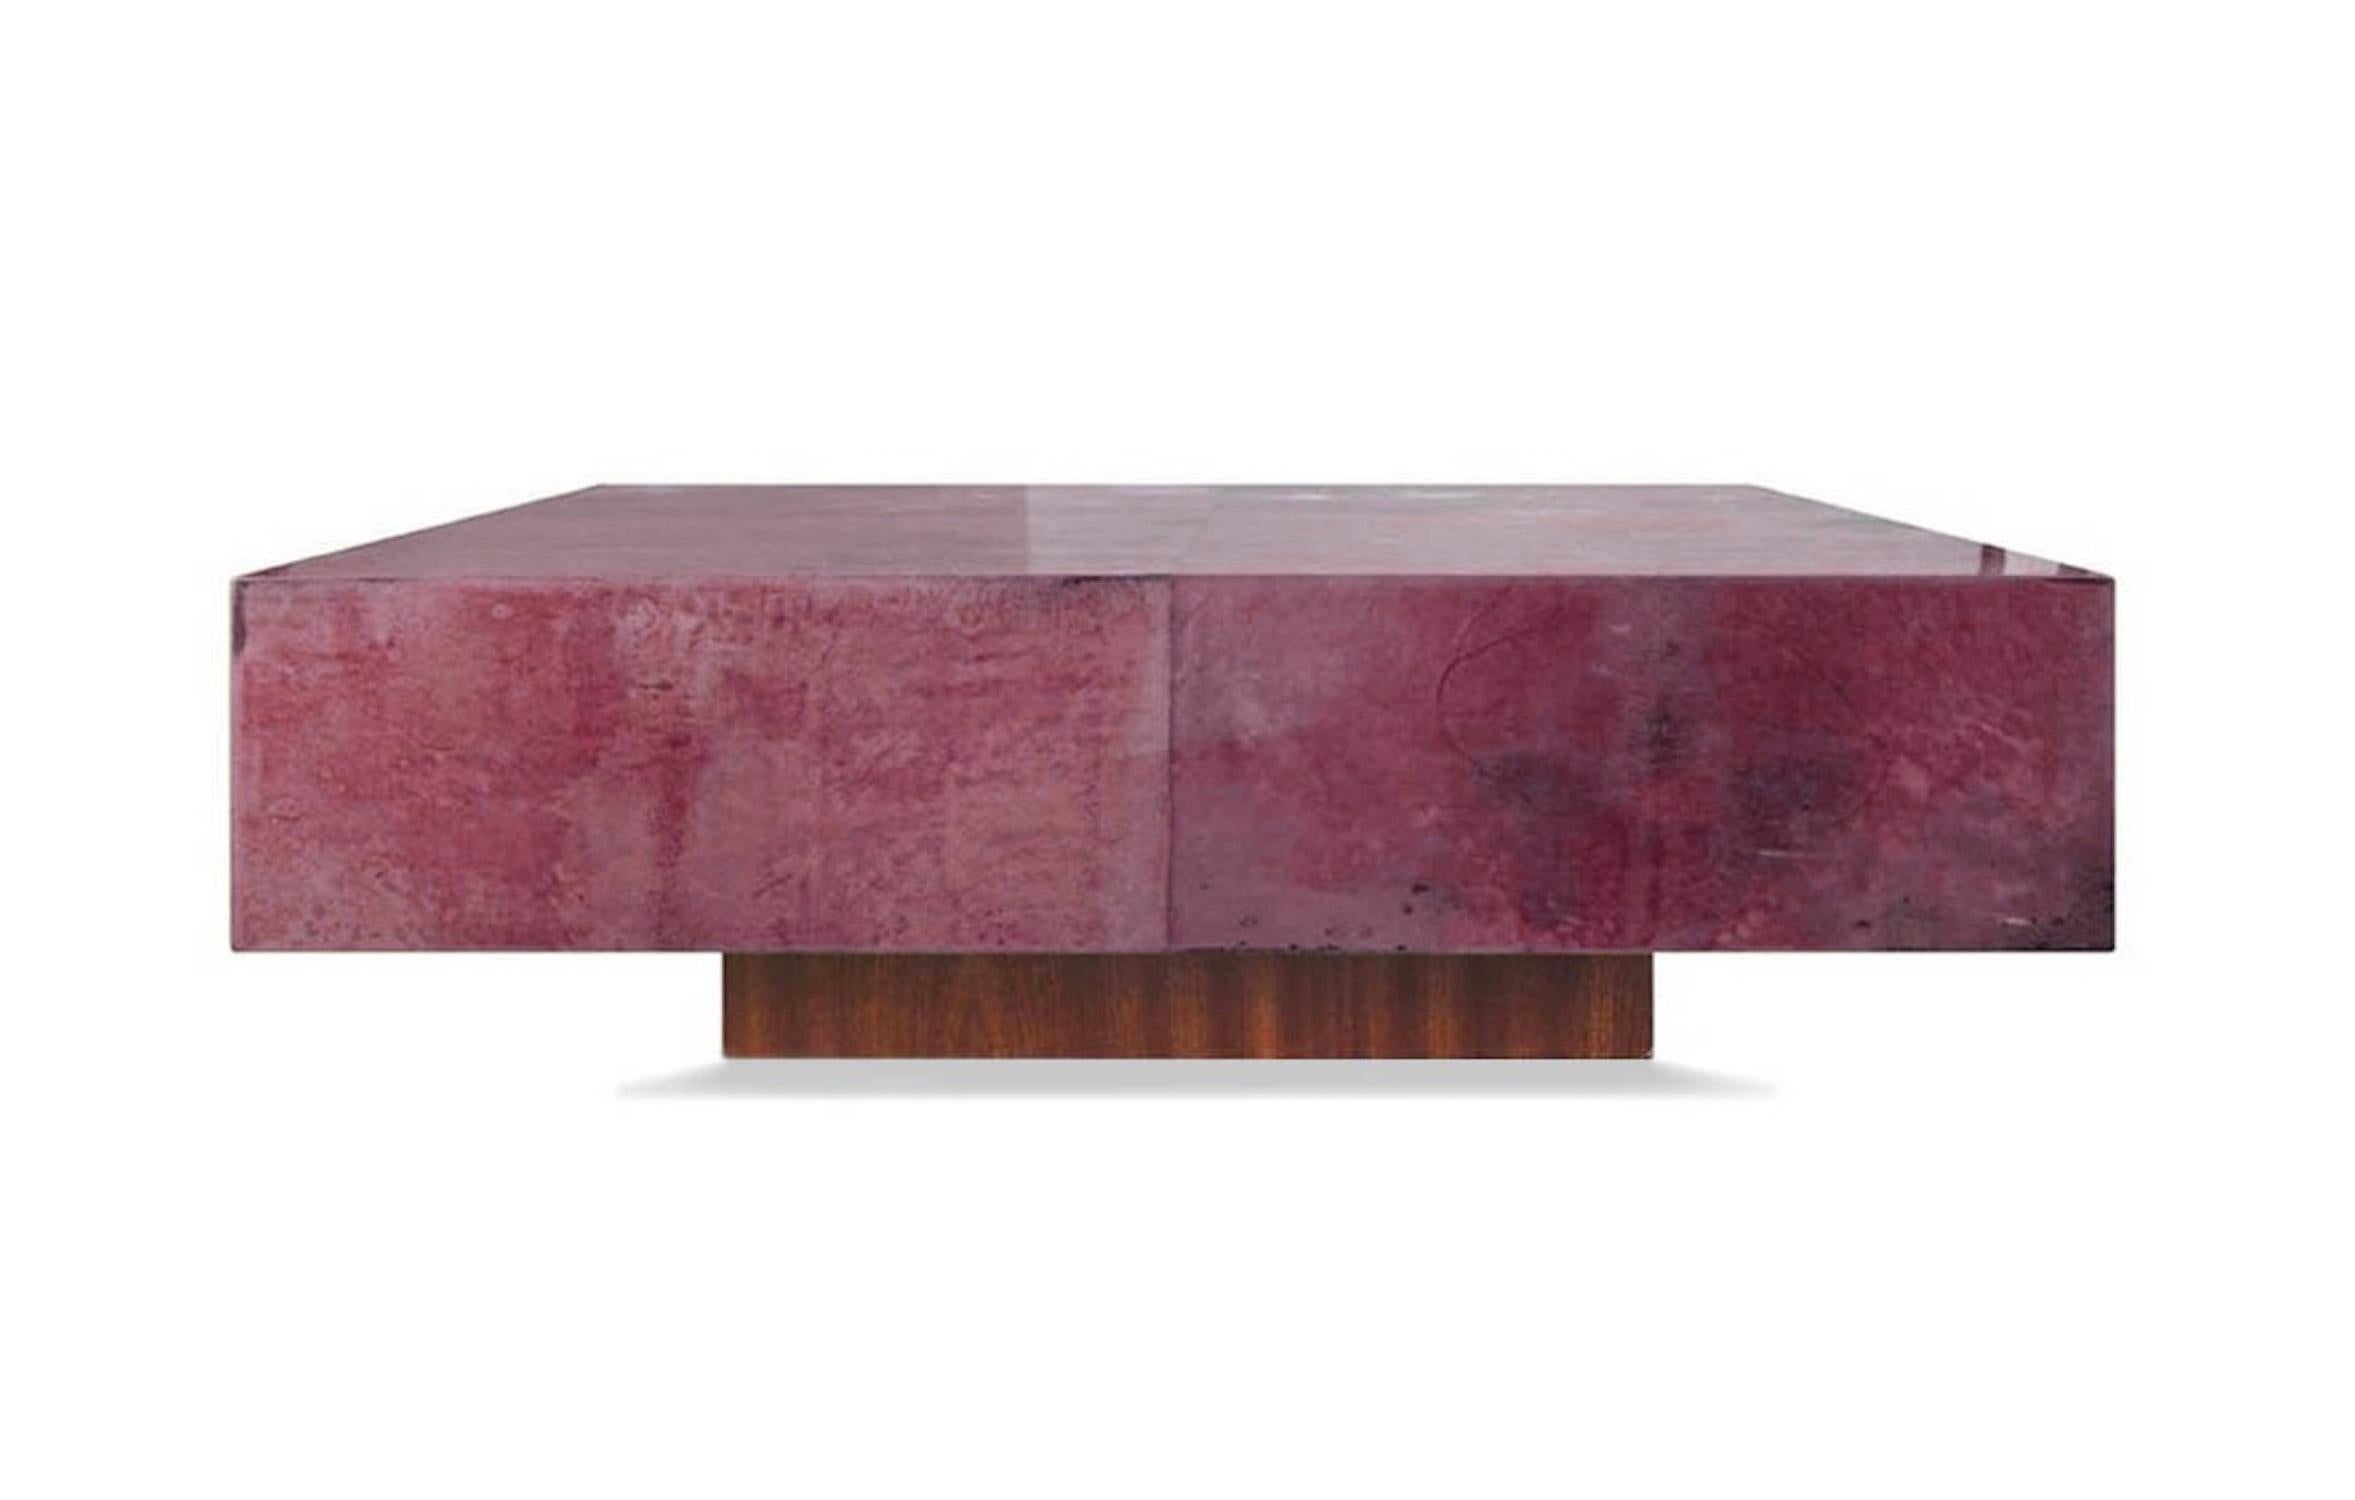 Parchment goatskin leather coffee table in color red plum, tie dye effect, rich of warm shades that go from purple to fuchsia: indeed a very artistic craftmanship of leather dyeing.
The top in parchment goatskin high gloss polish finished, sits on